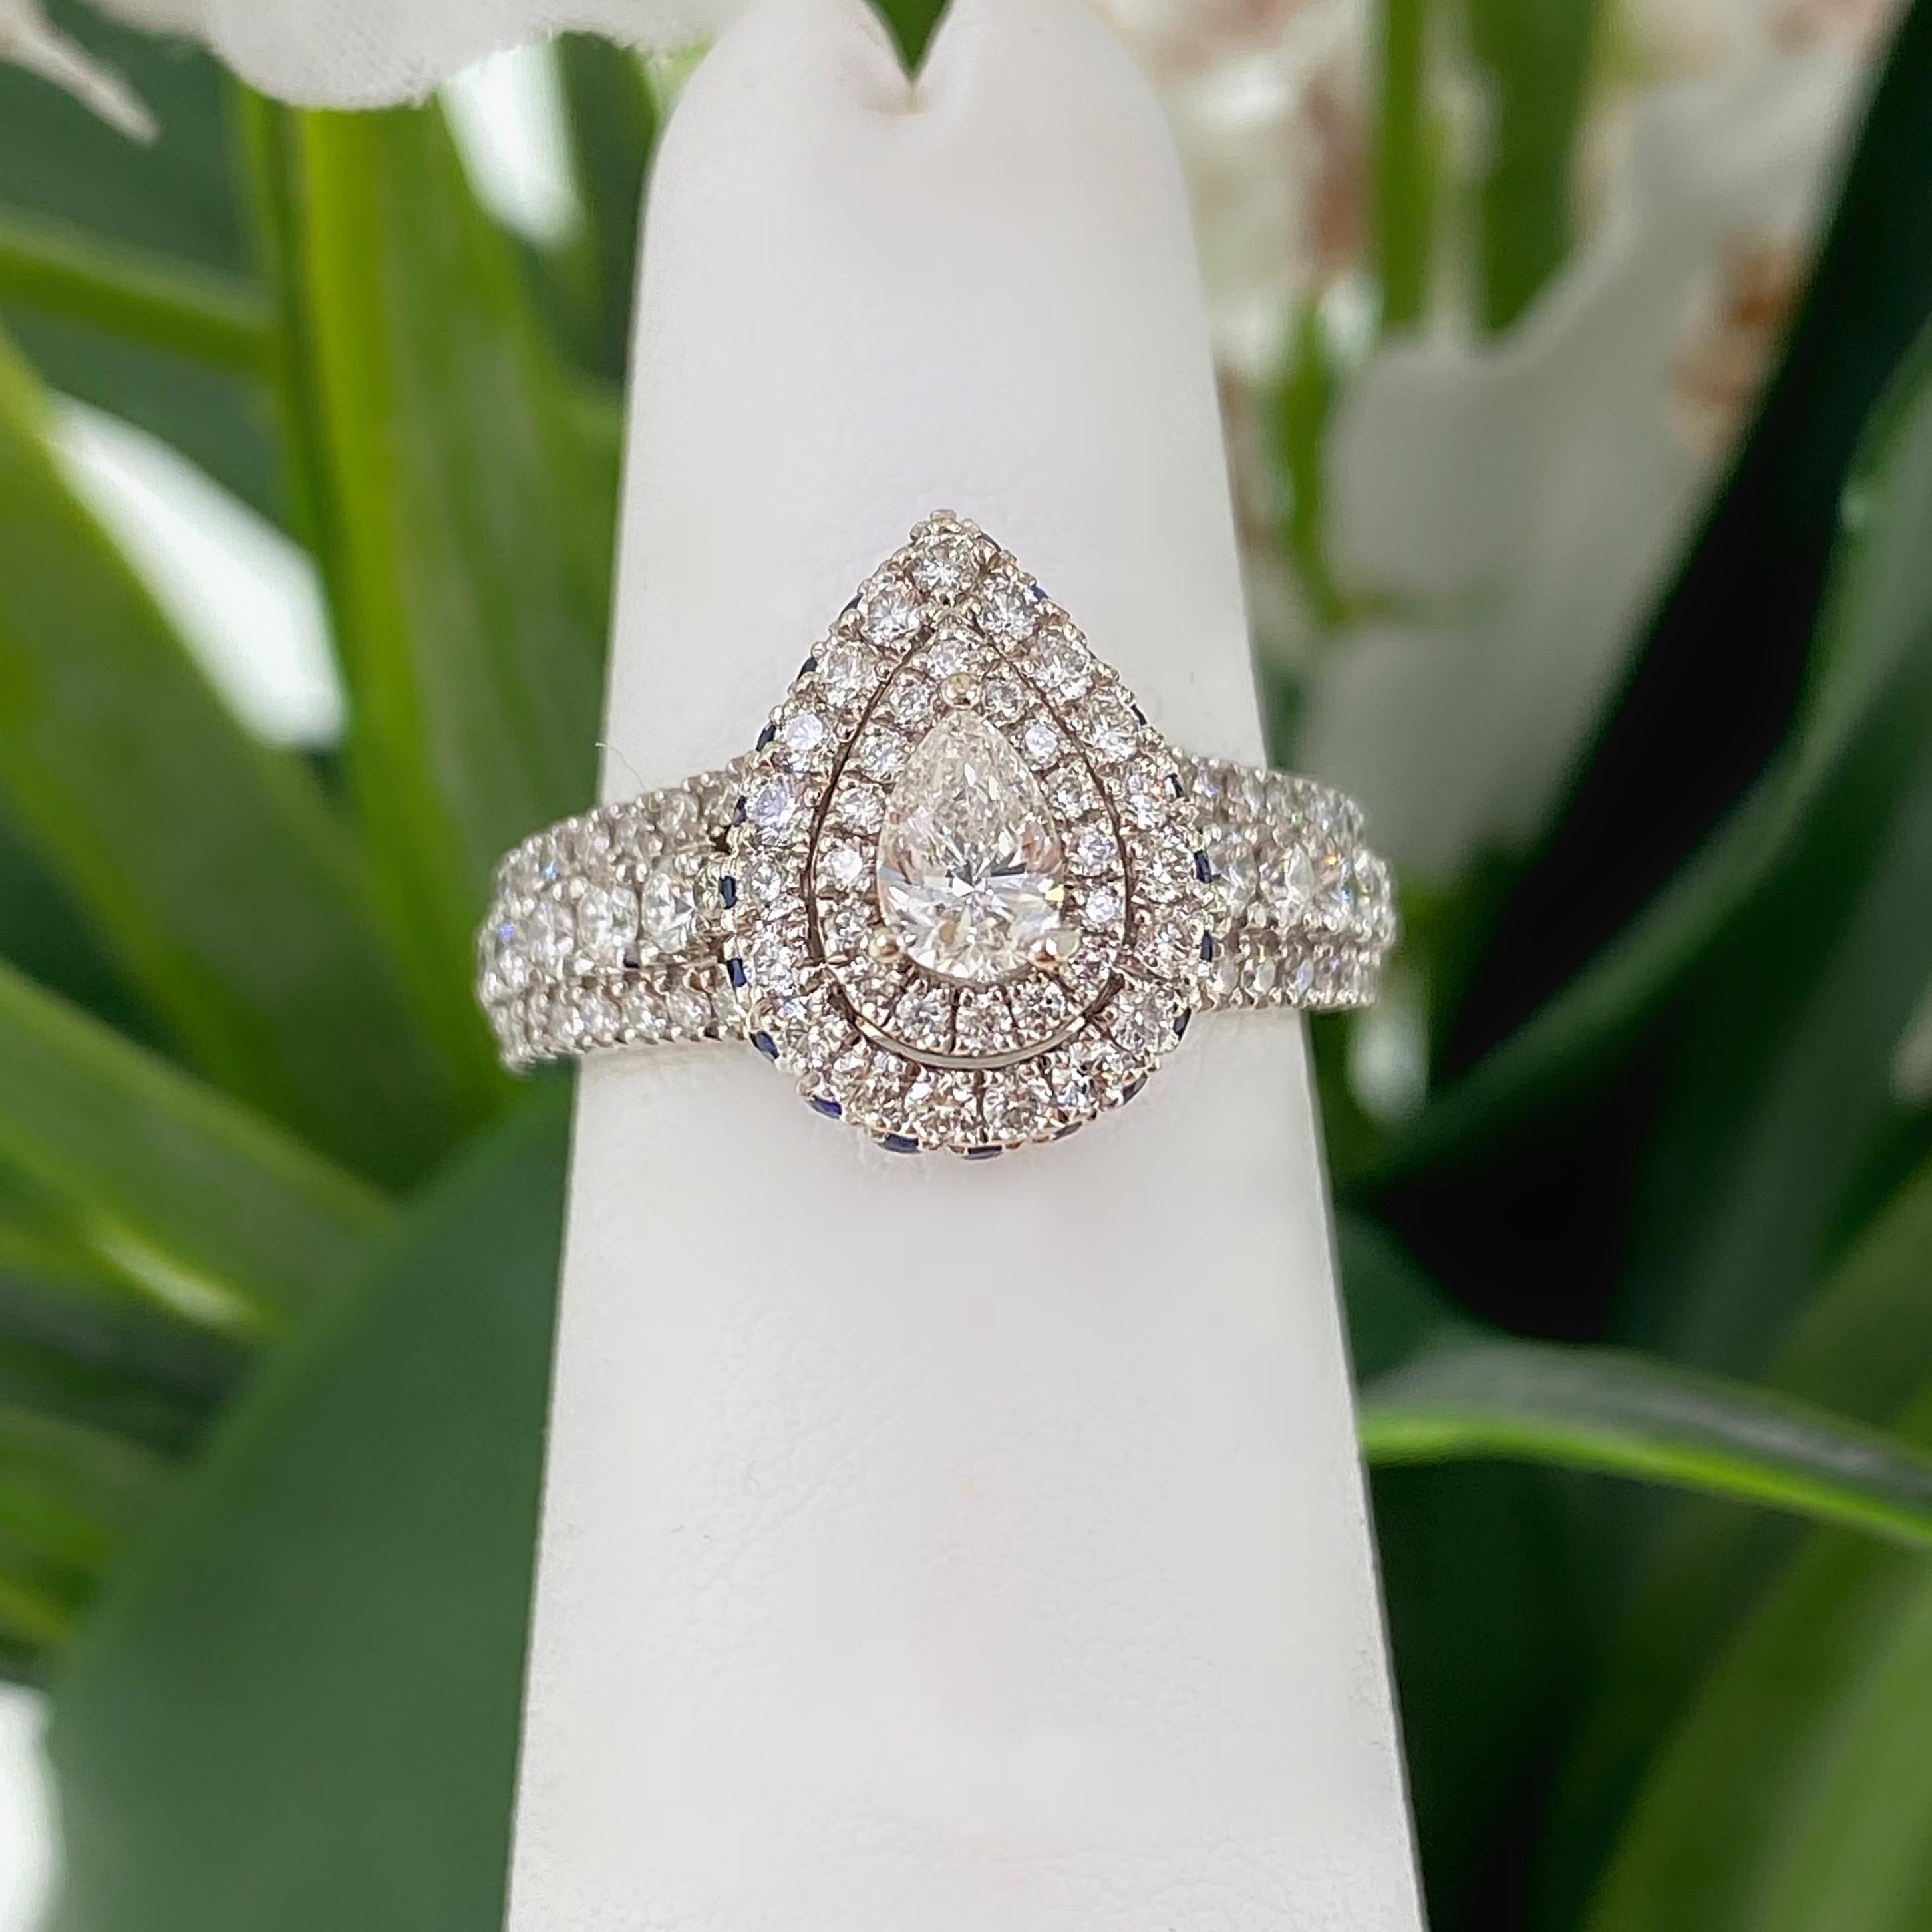 Vera Wang LOVE Collection Double Halo Engagement Ring
Style:  20332385
Metal:  14kt White Gold
Size / Measurements:  4.75 - sizable
TCW:  1.00 tcw
Main Diamond:  Pear Shape Diamond 1/4 cts
Color & Clarity:  I / SI2
Accent Diamonds:   95 Round